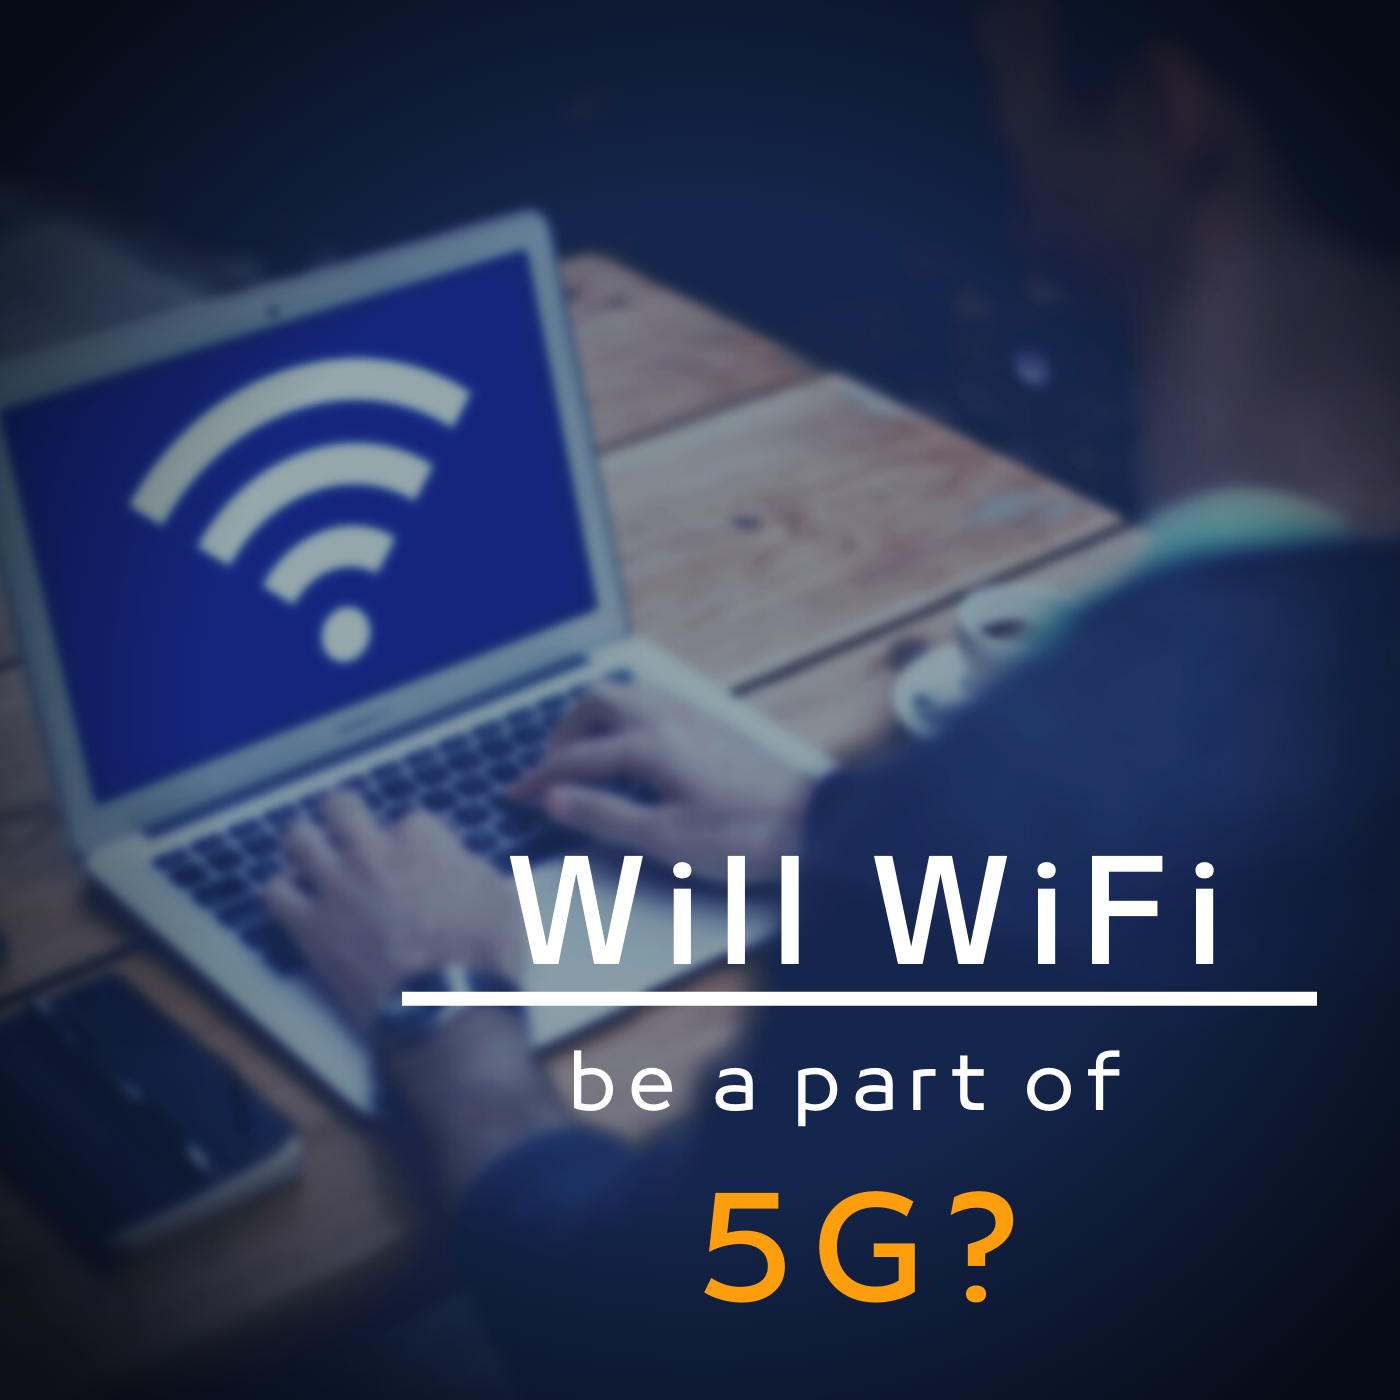 will wifi be a part of 5g